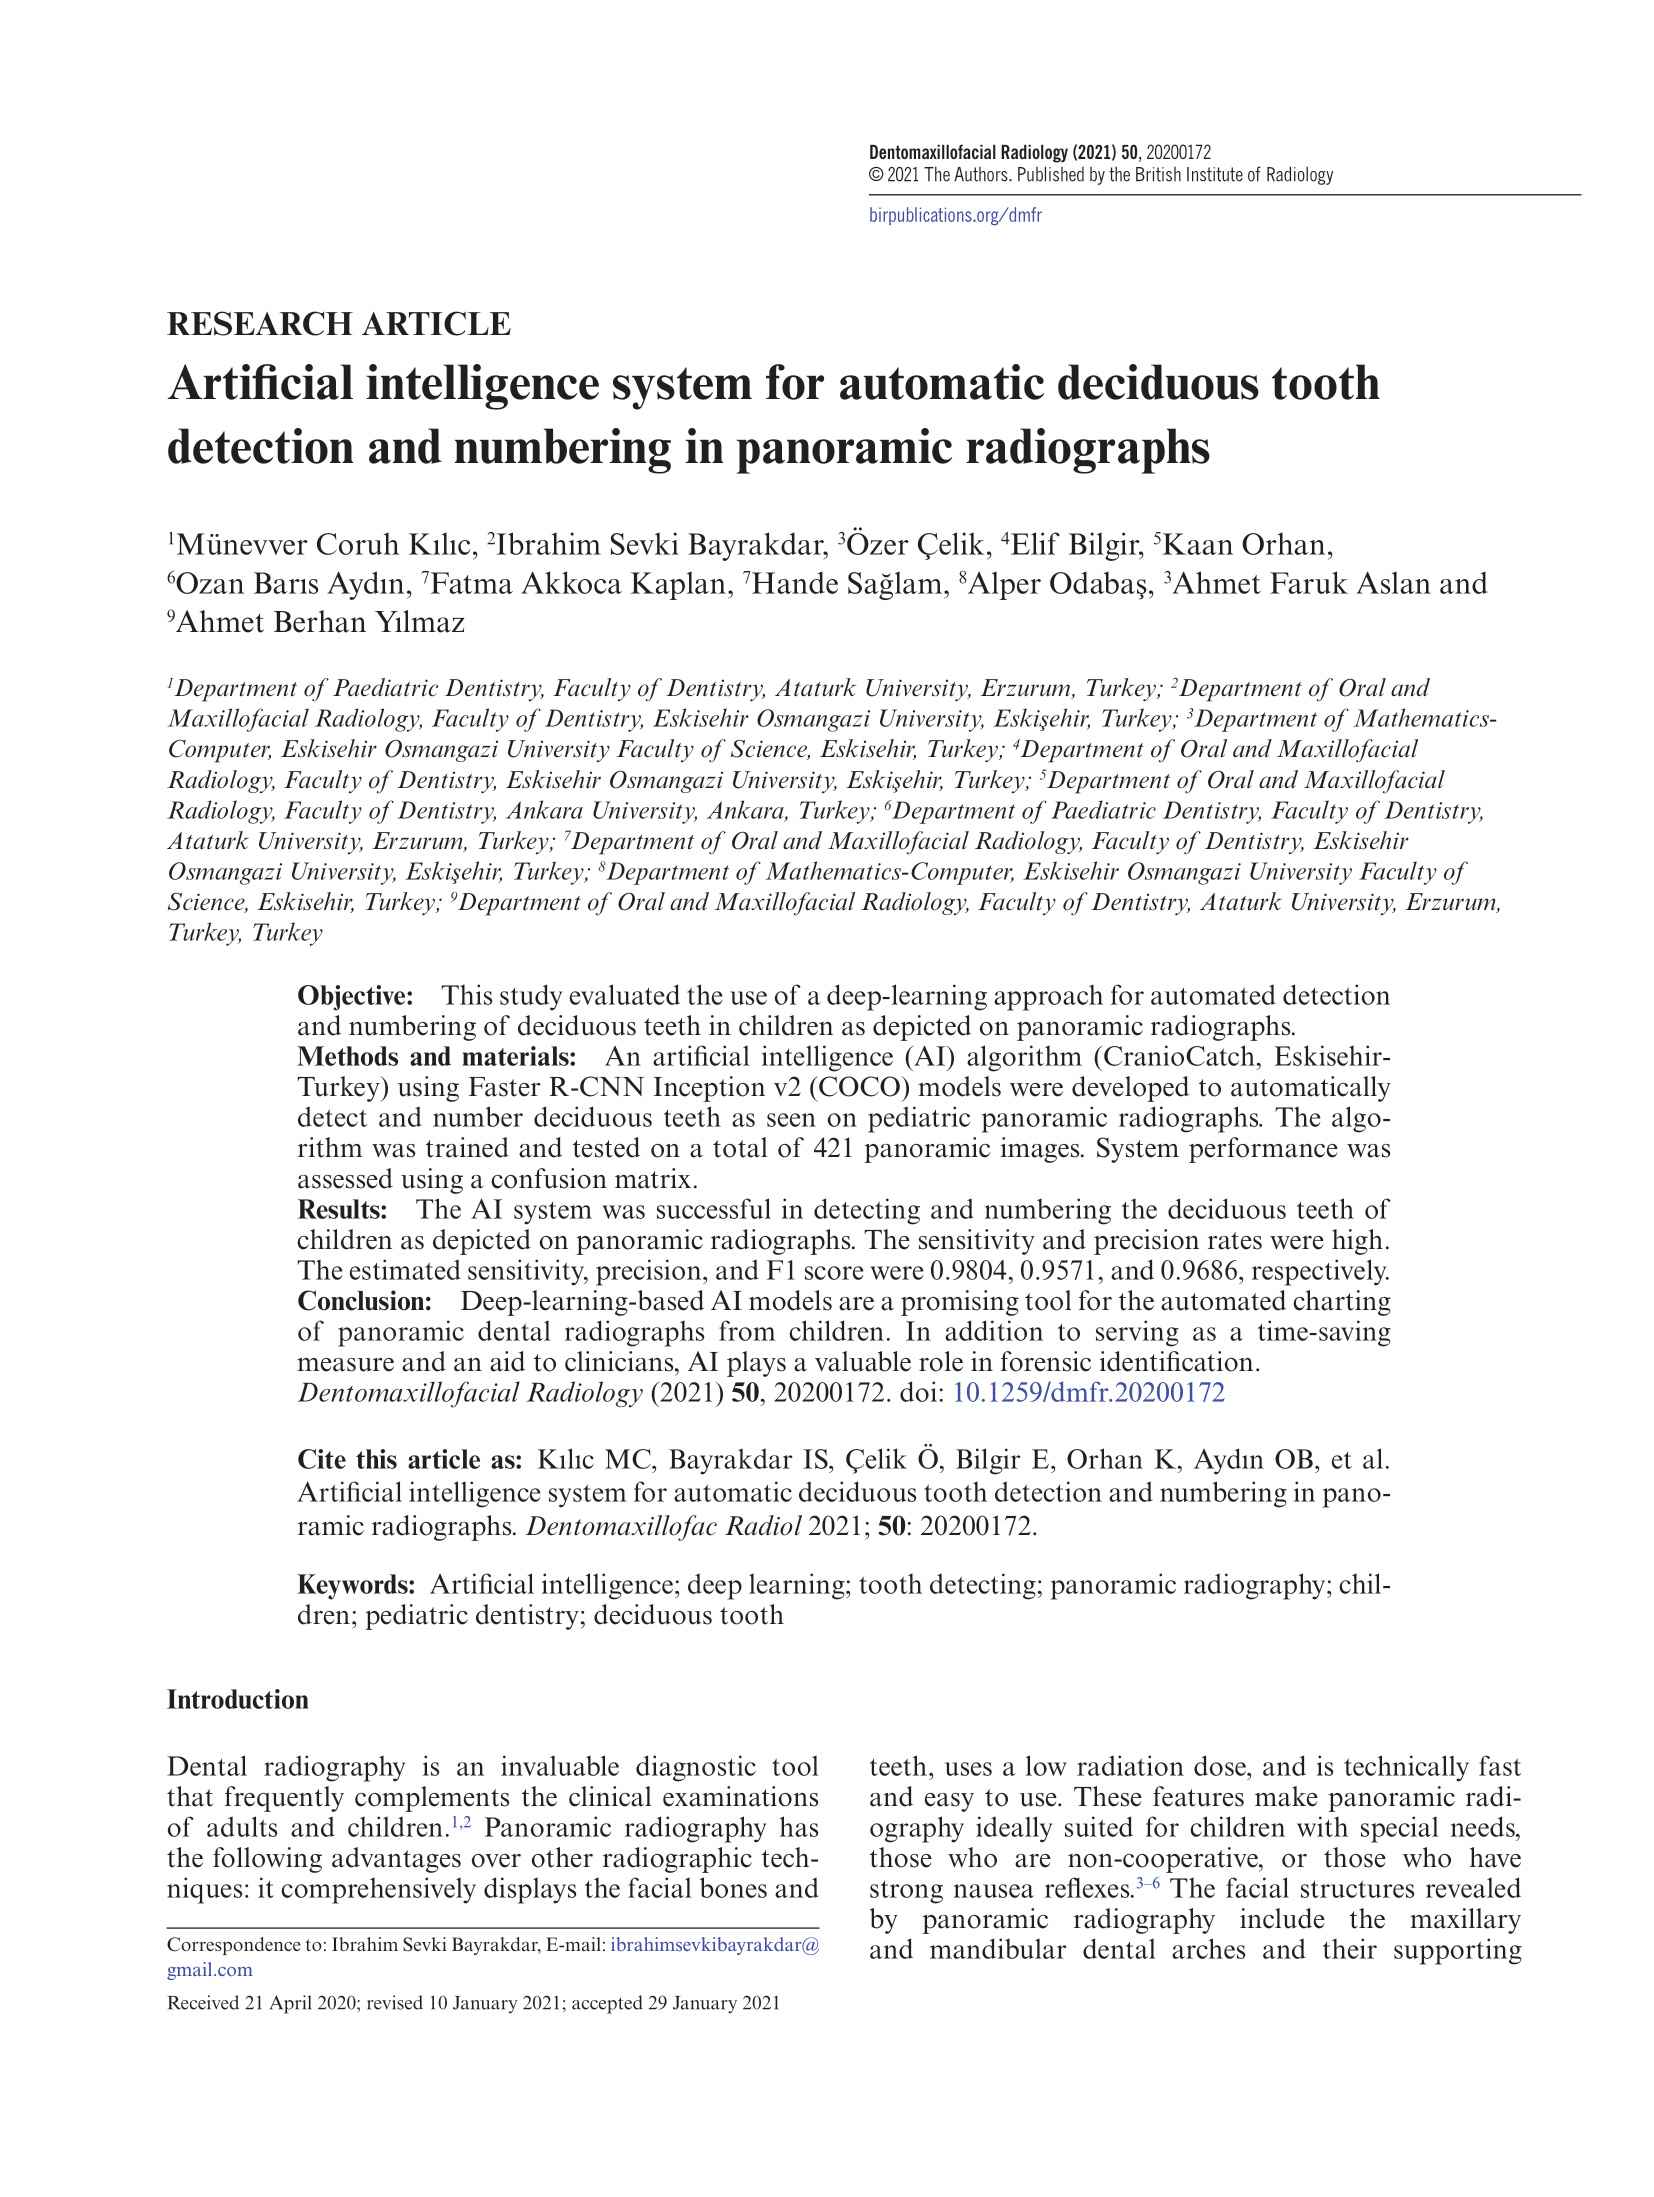 Artificial intelligence system for automatic deciduous tooth detection and numbering in panoramic radiographs